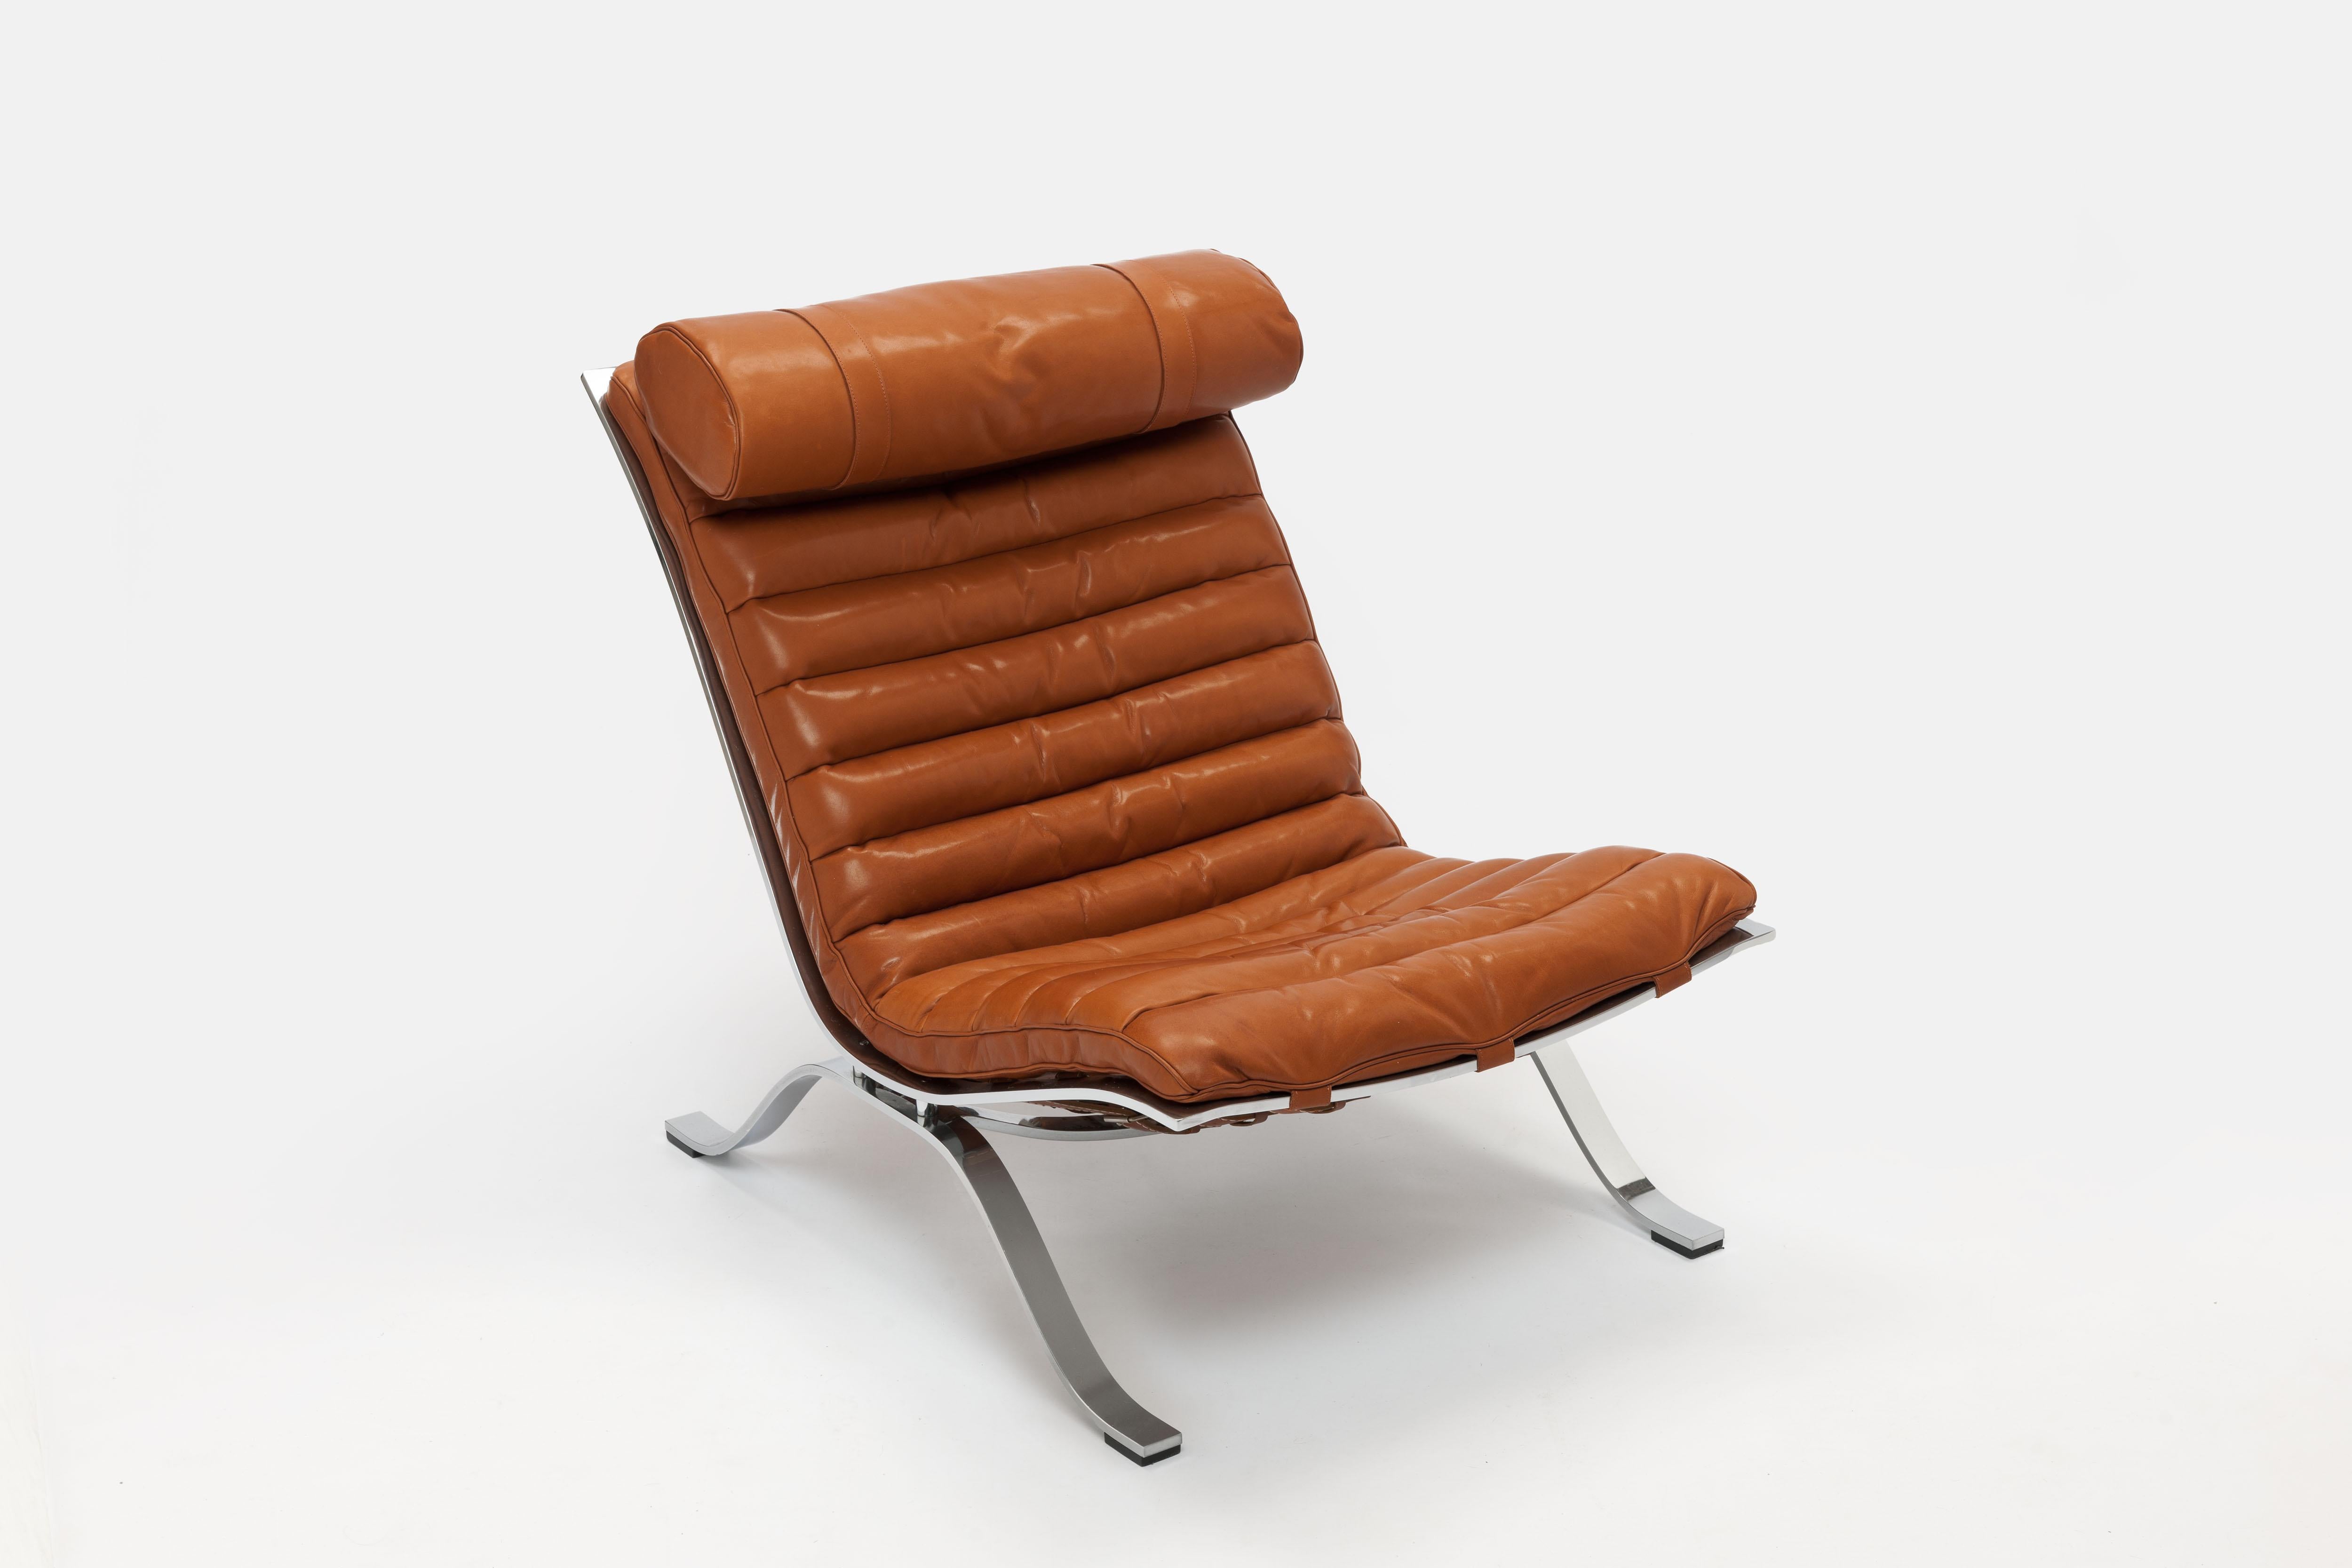 Steel Arne Norell ARI Lounge Chair in Cognac Leather